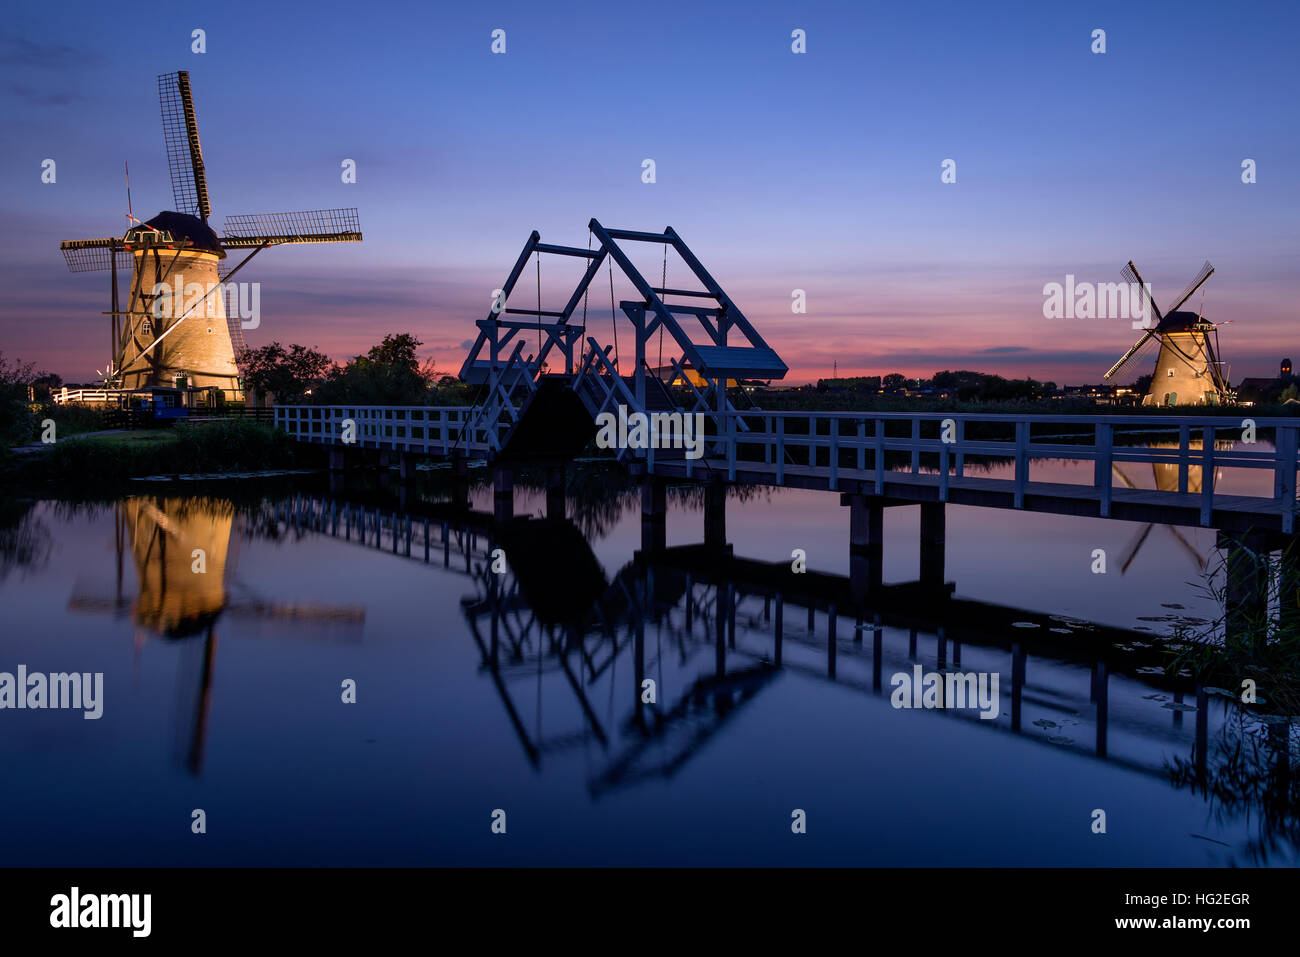 Two illuminated windmills and a drawbridge with reflection in the water of the canal in the last light at sunset in Kinderdijk in the Netherlands. Stock Photo